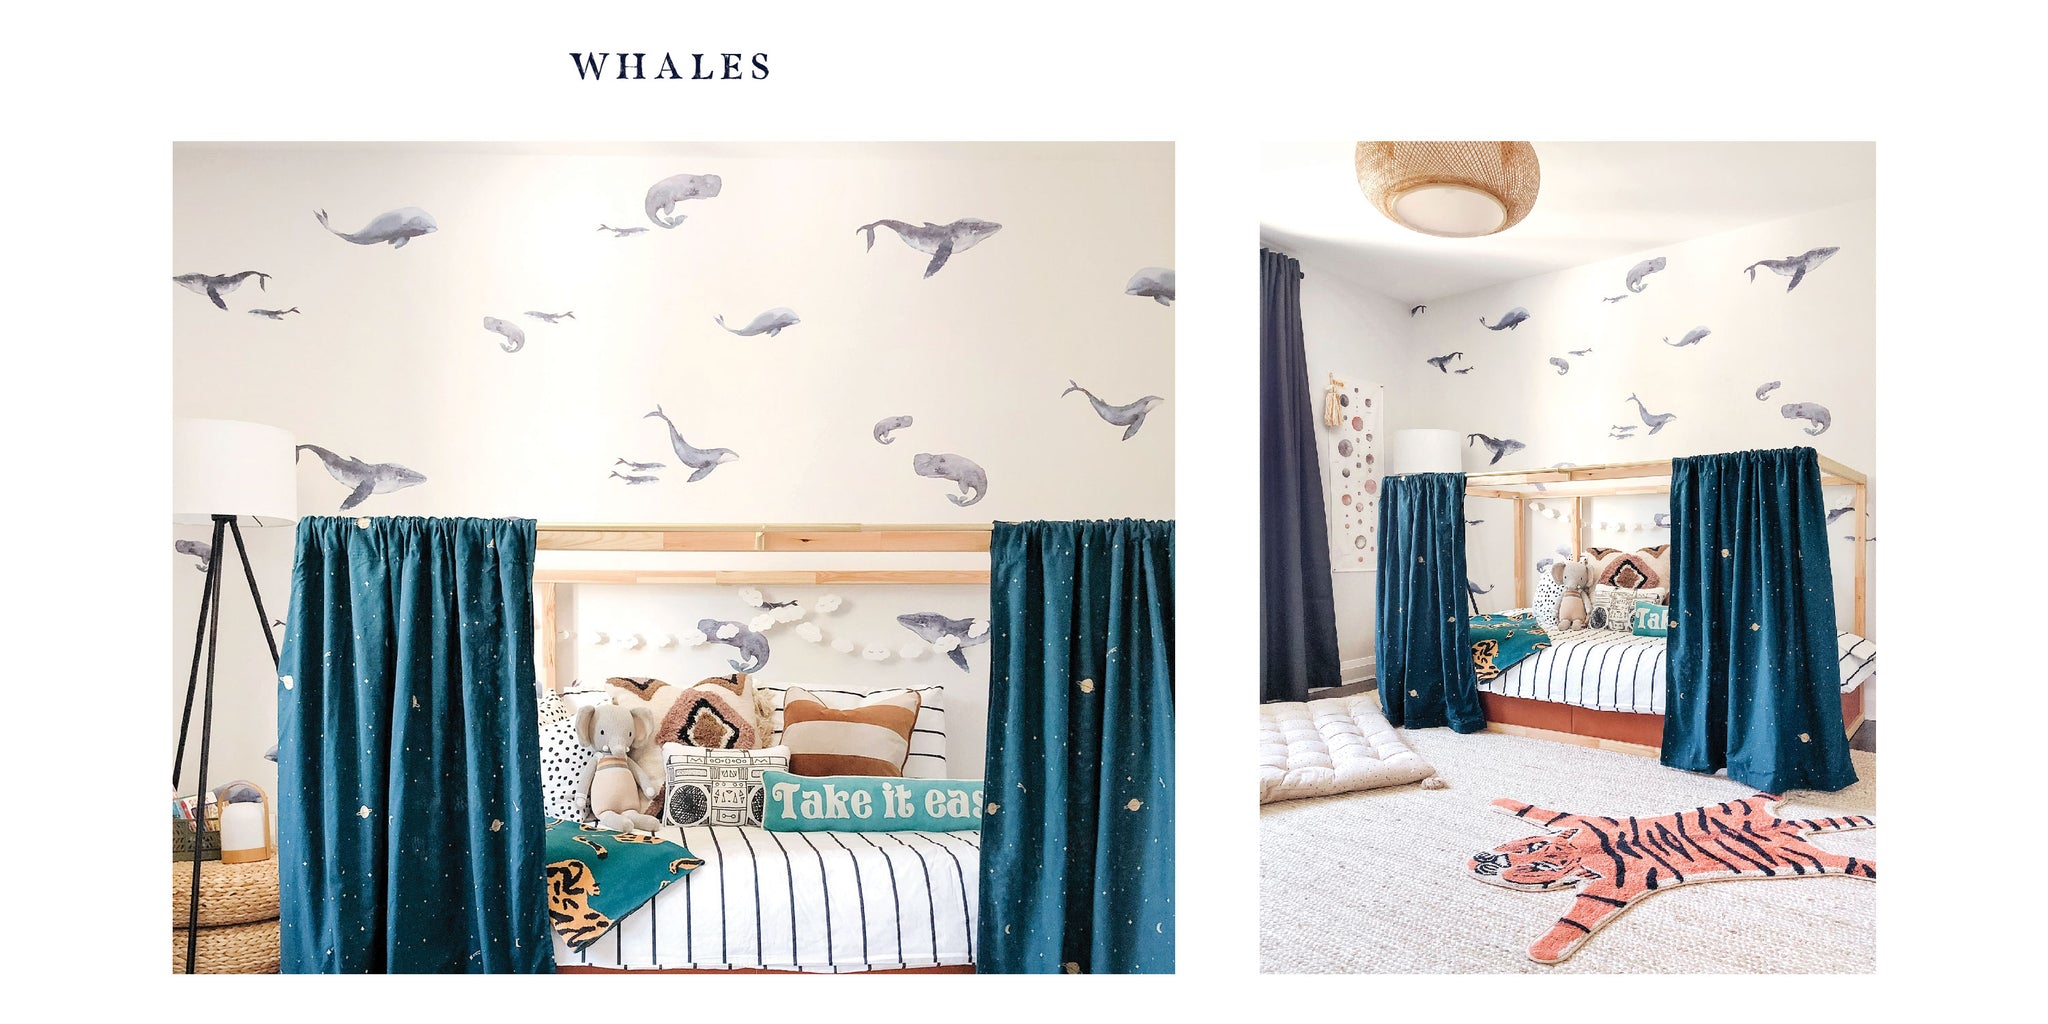 Room with blue whale wall decal